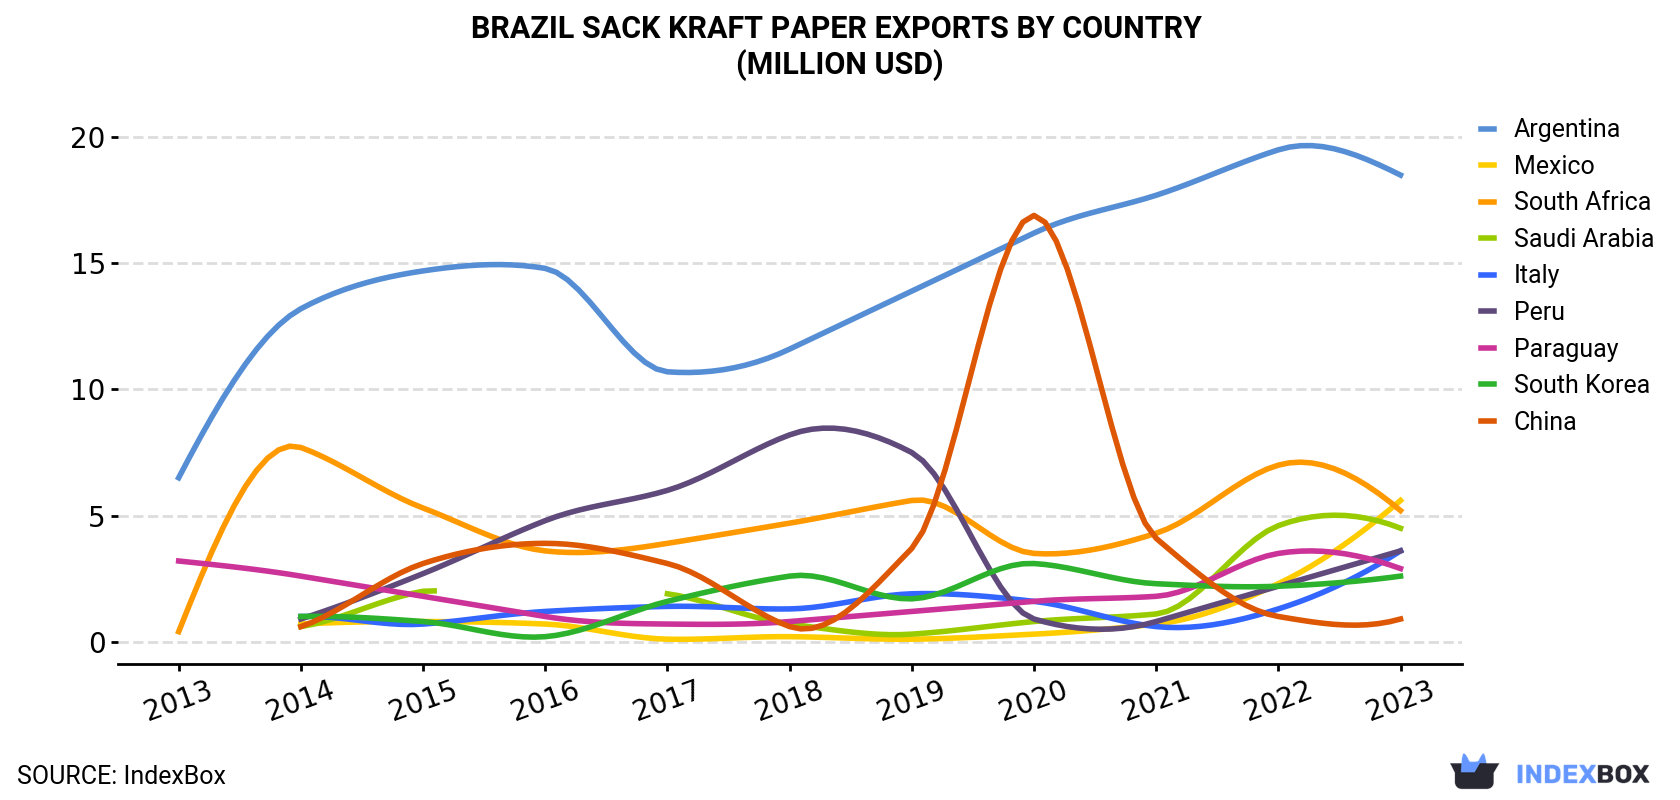 Brazil Sack Kraft Paper Exports By Country (Million USD)